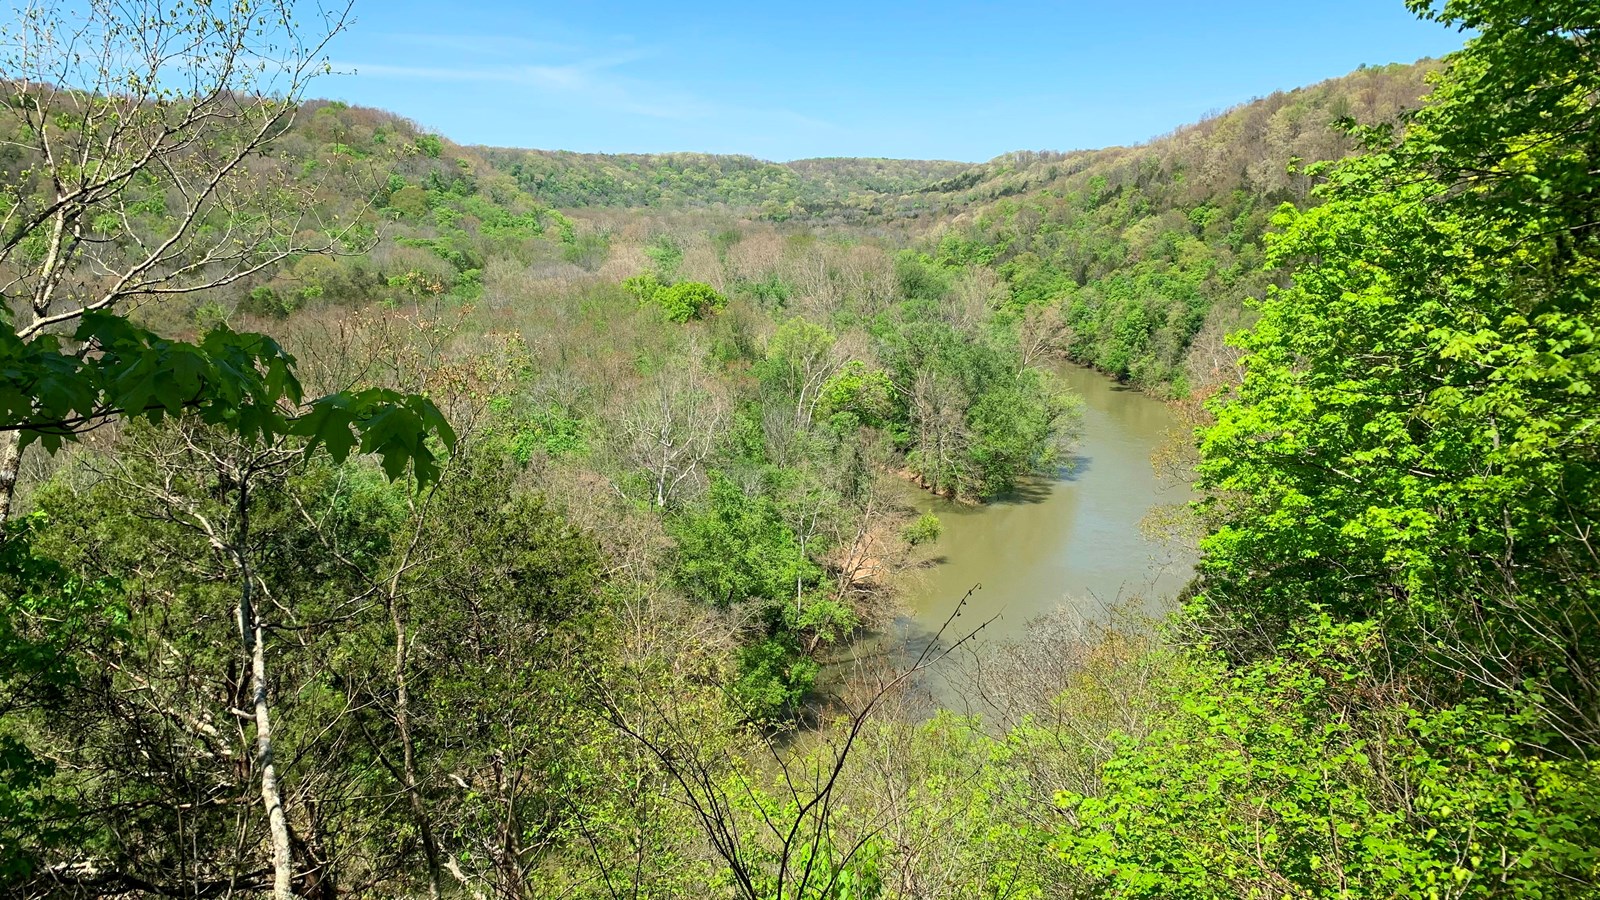 Bright green forested hills lead down to a murky wide river with a blue sky in the background